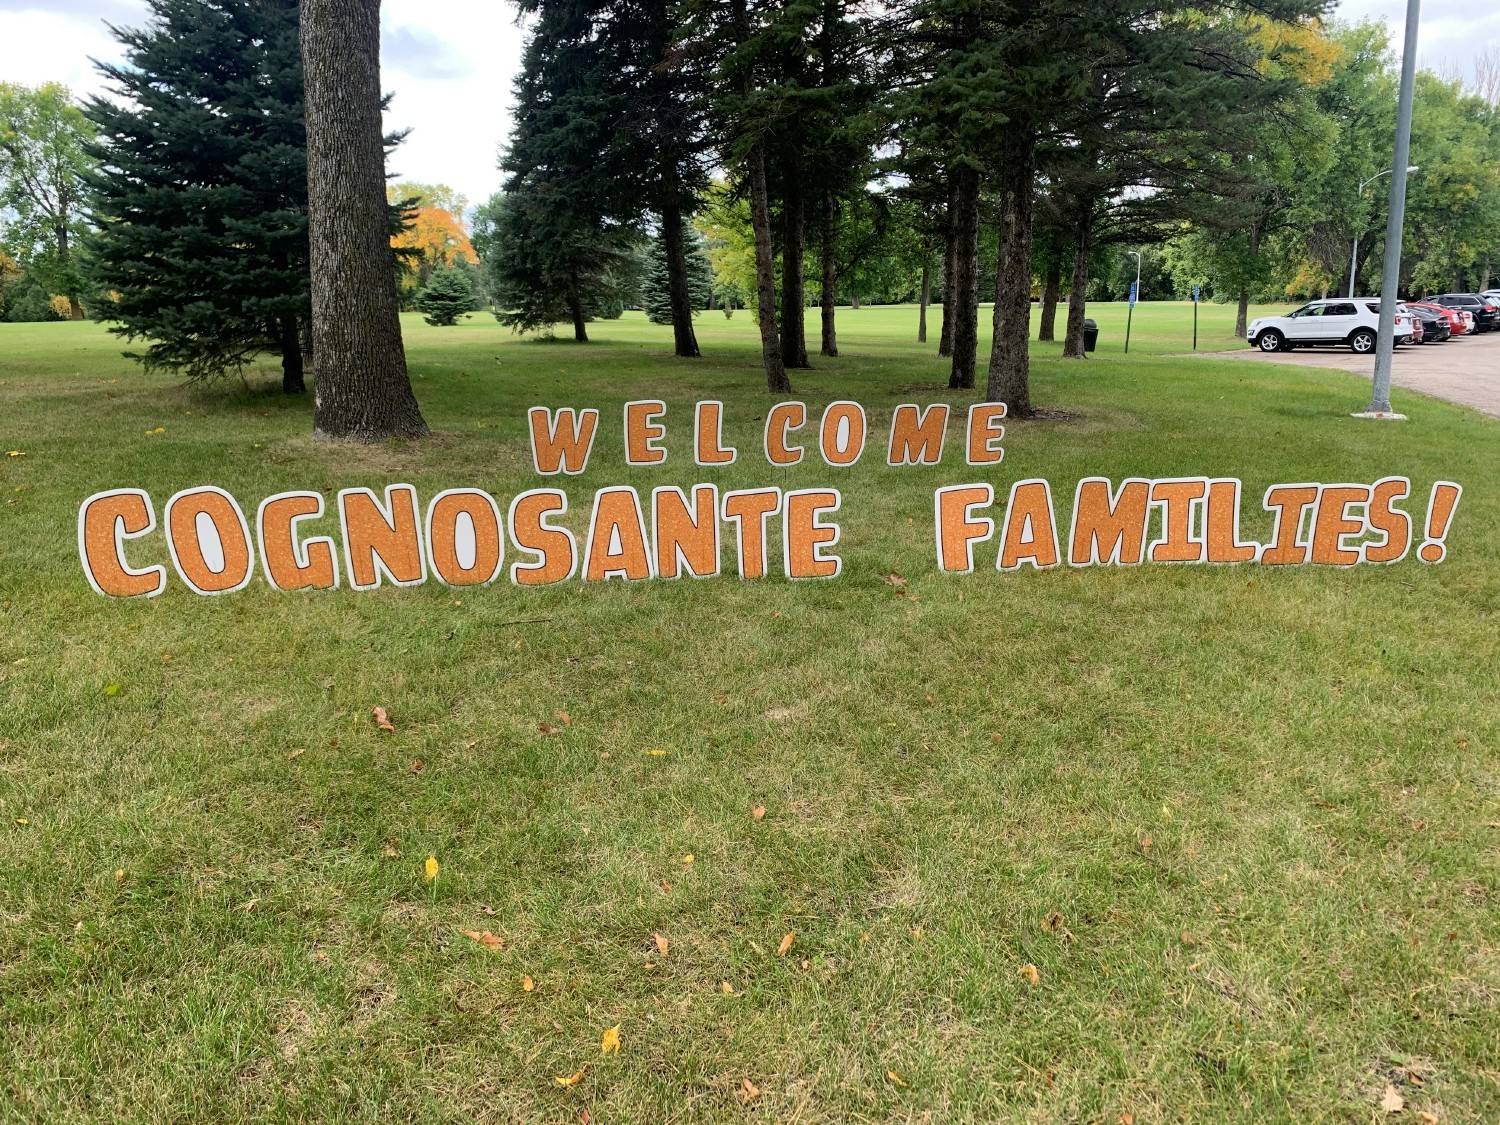 Cognosante's annual Family Fun Day event occurs nationwide in our hub locations for team members and their families.